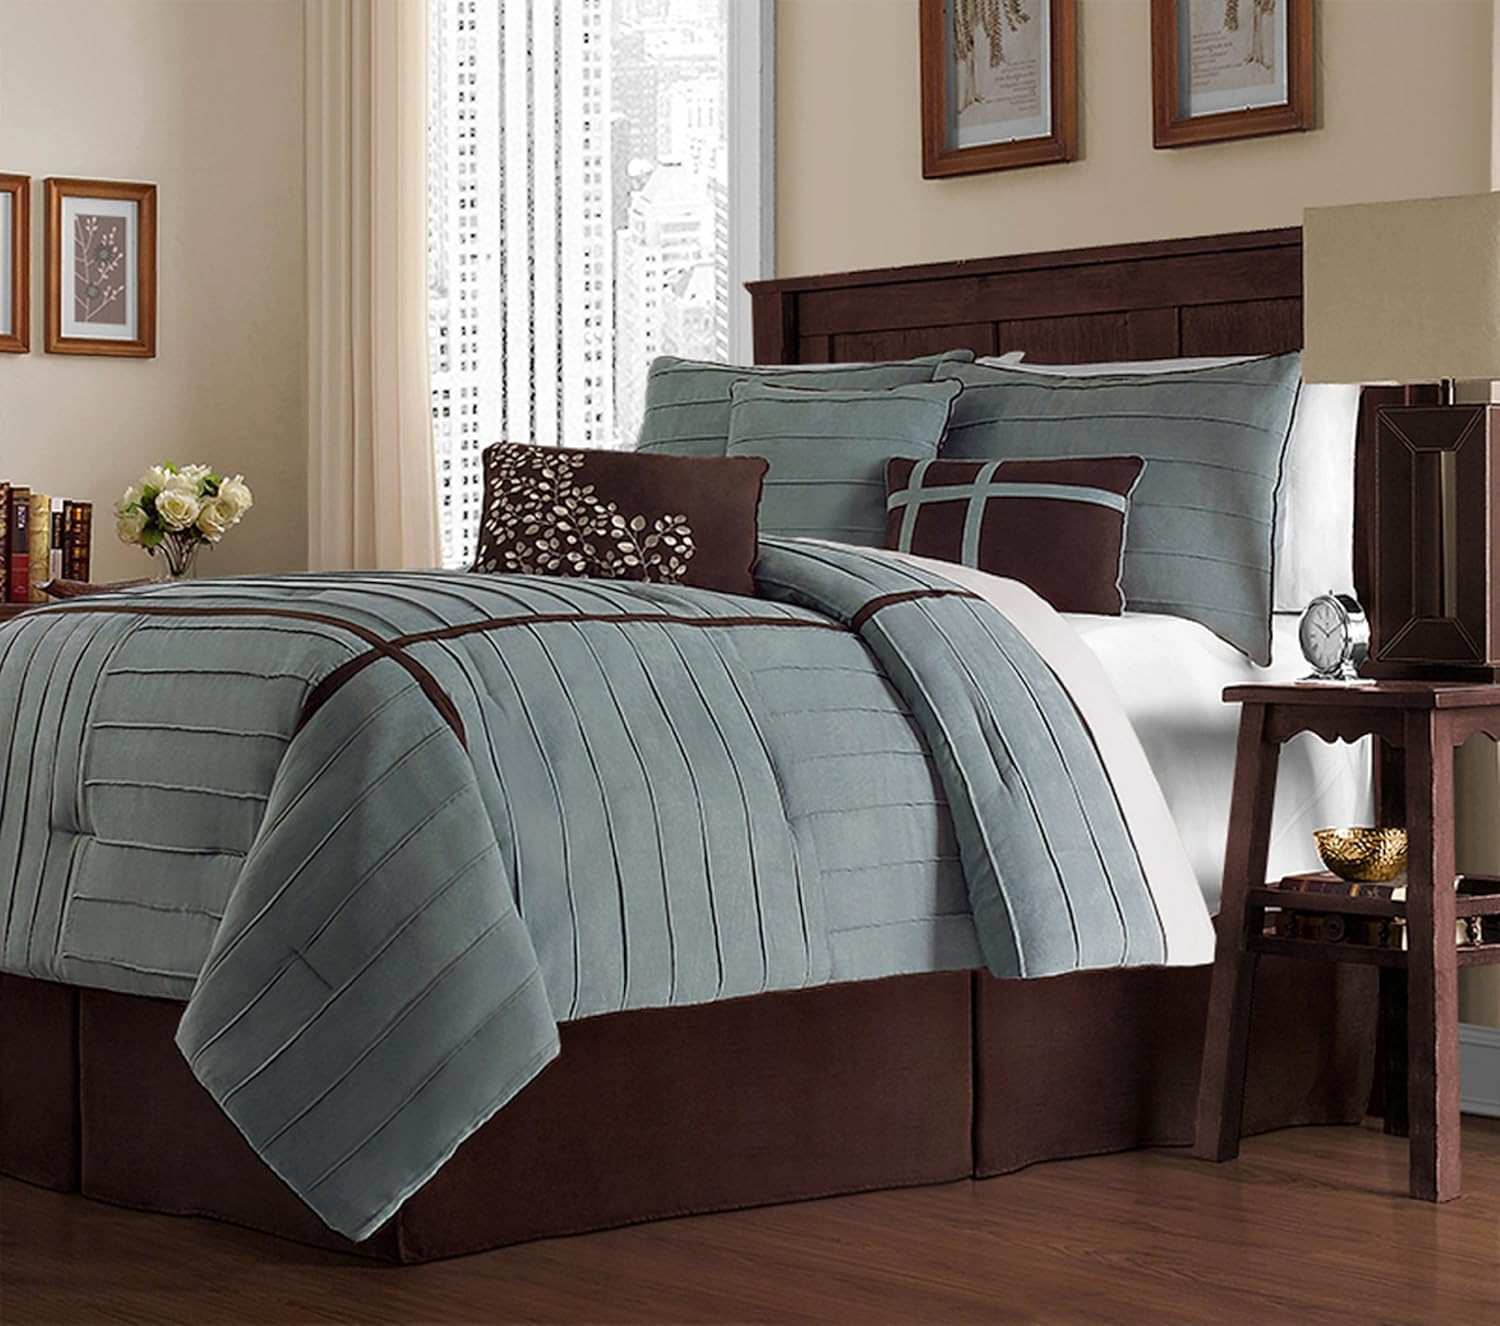 Brown and Blue Bedding Sets